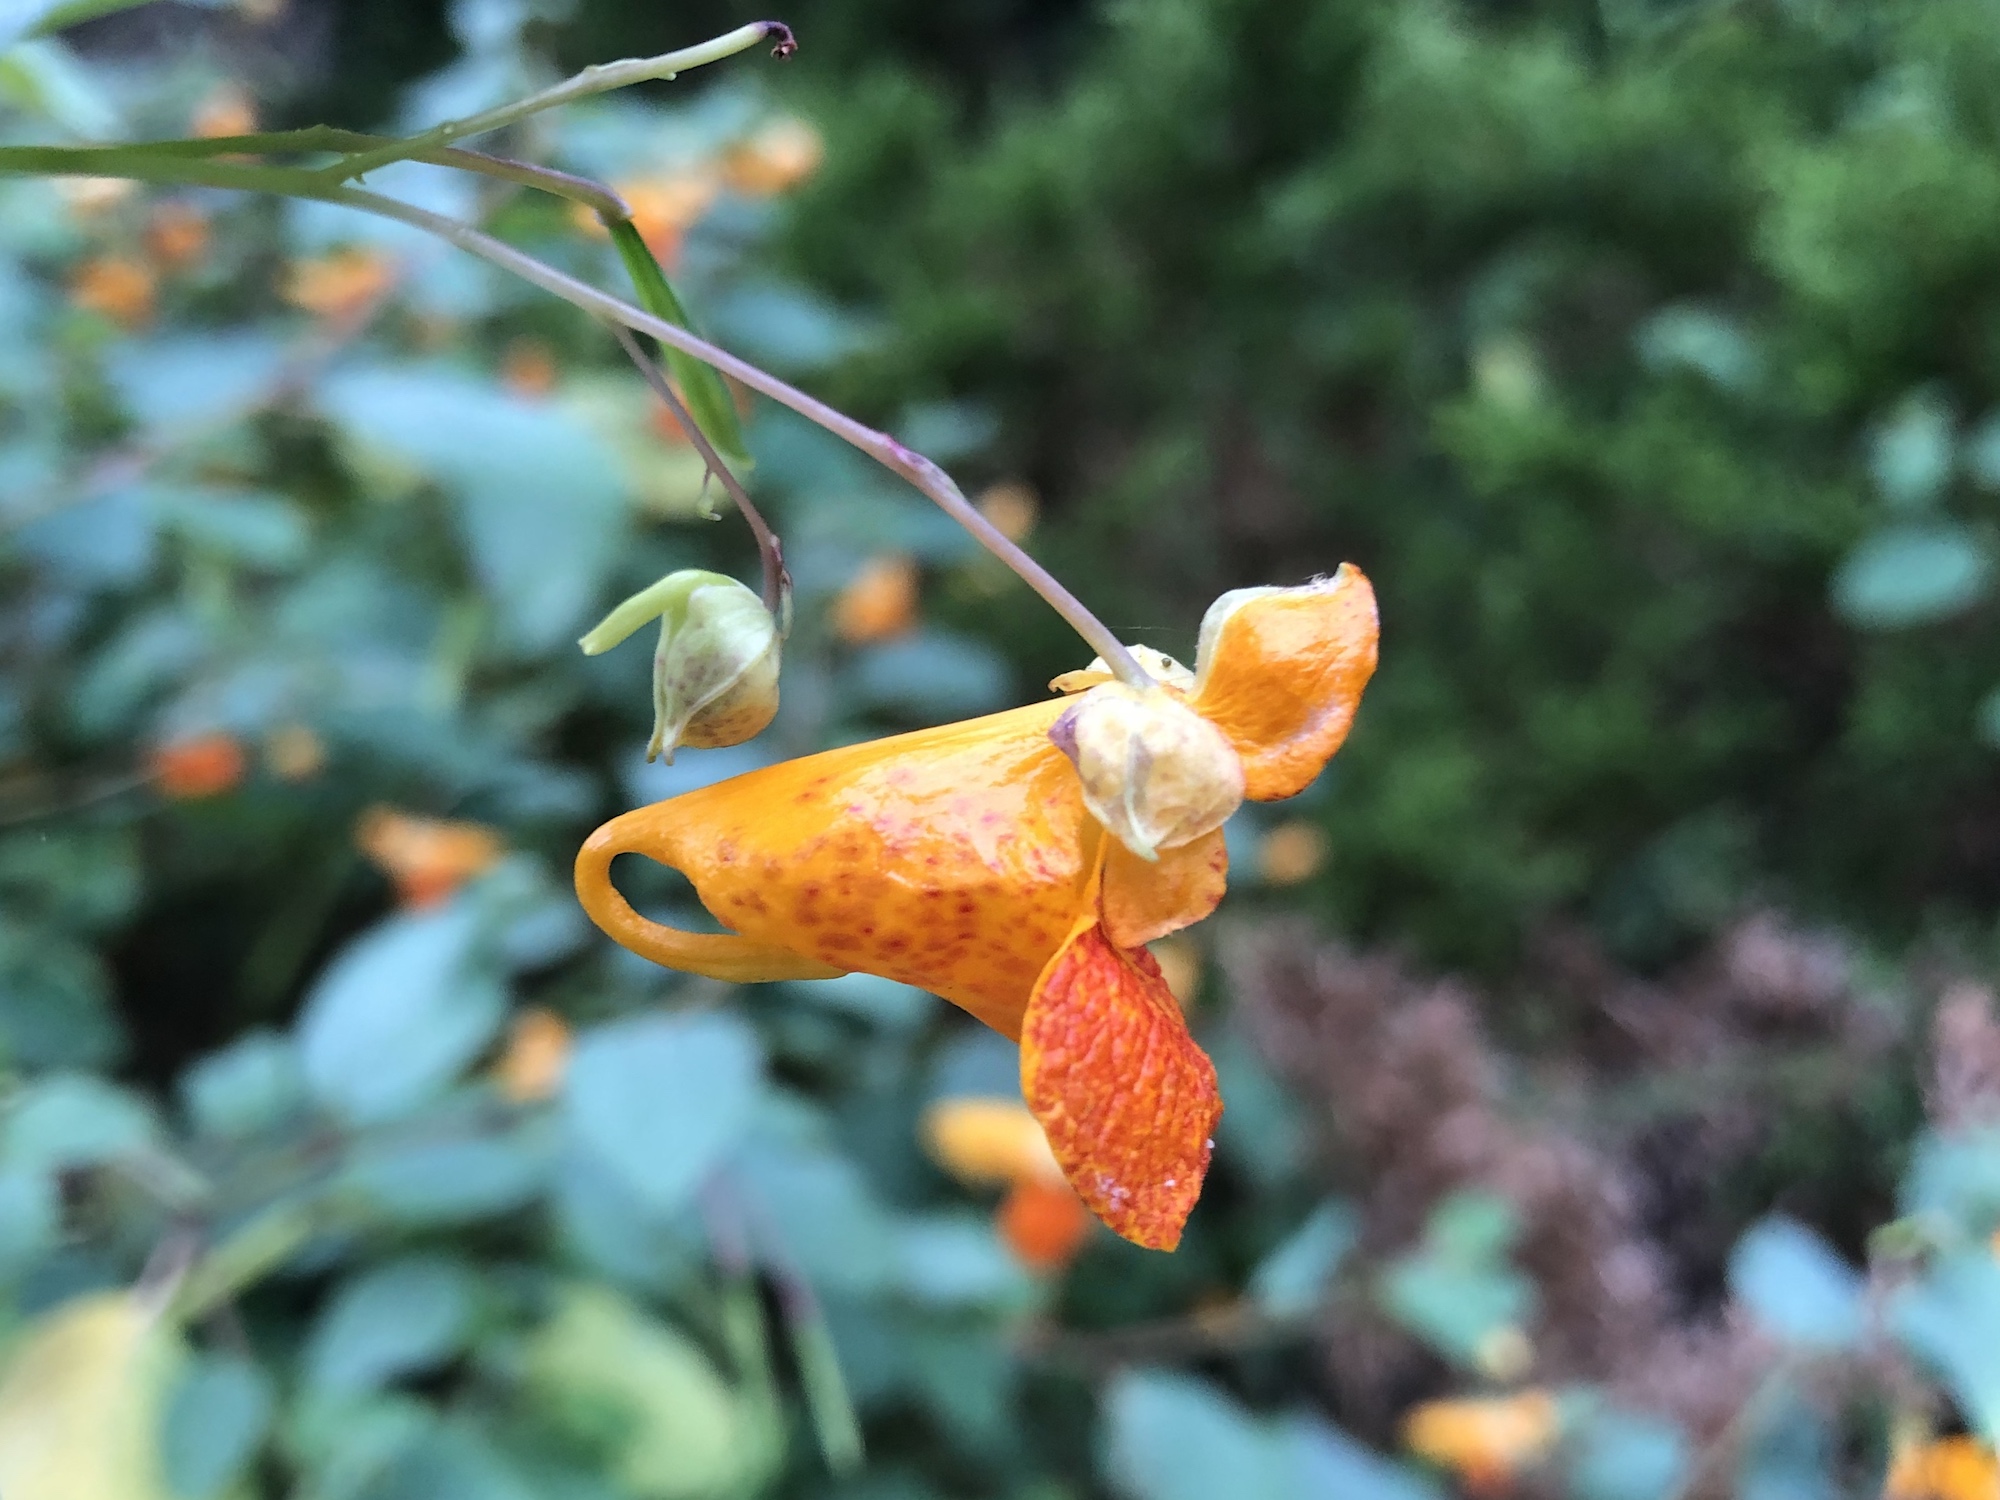 Spotted Jewelweed in Nakoma Park on August 21, 2019.